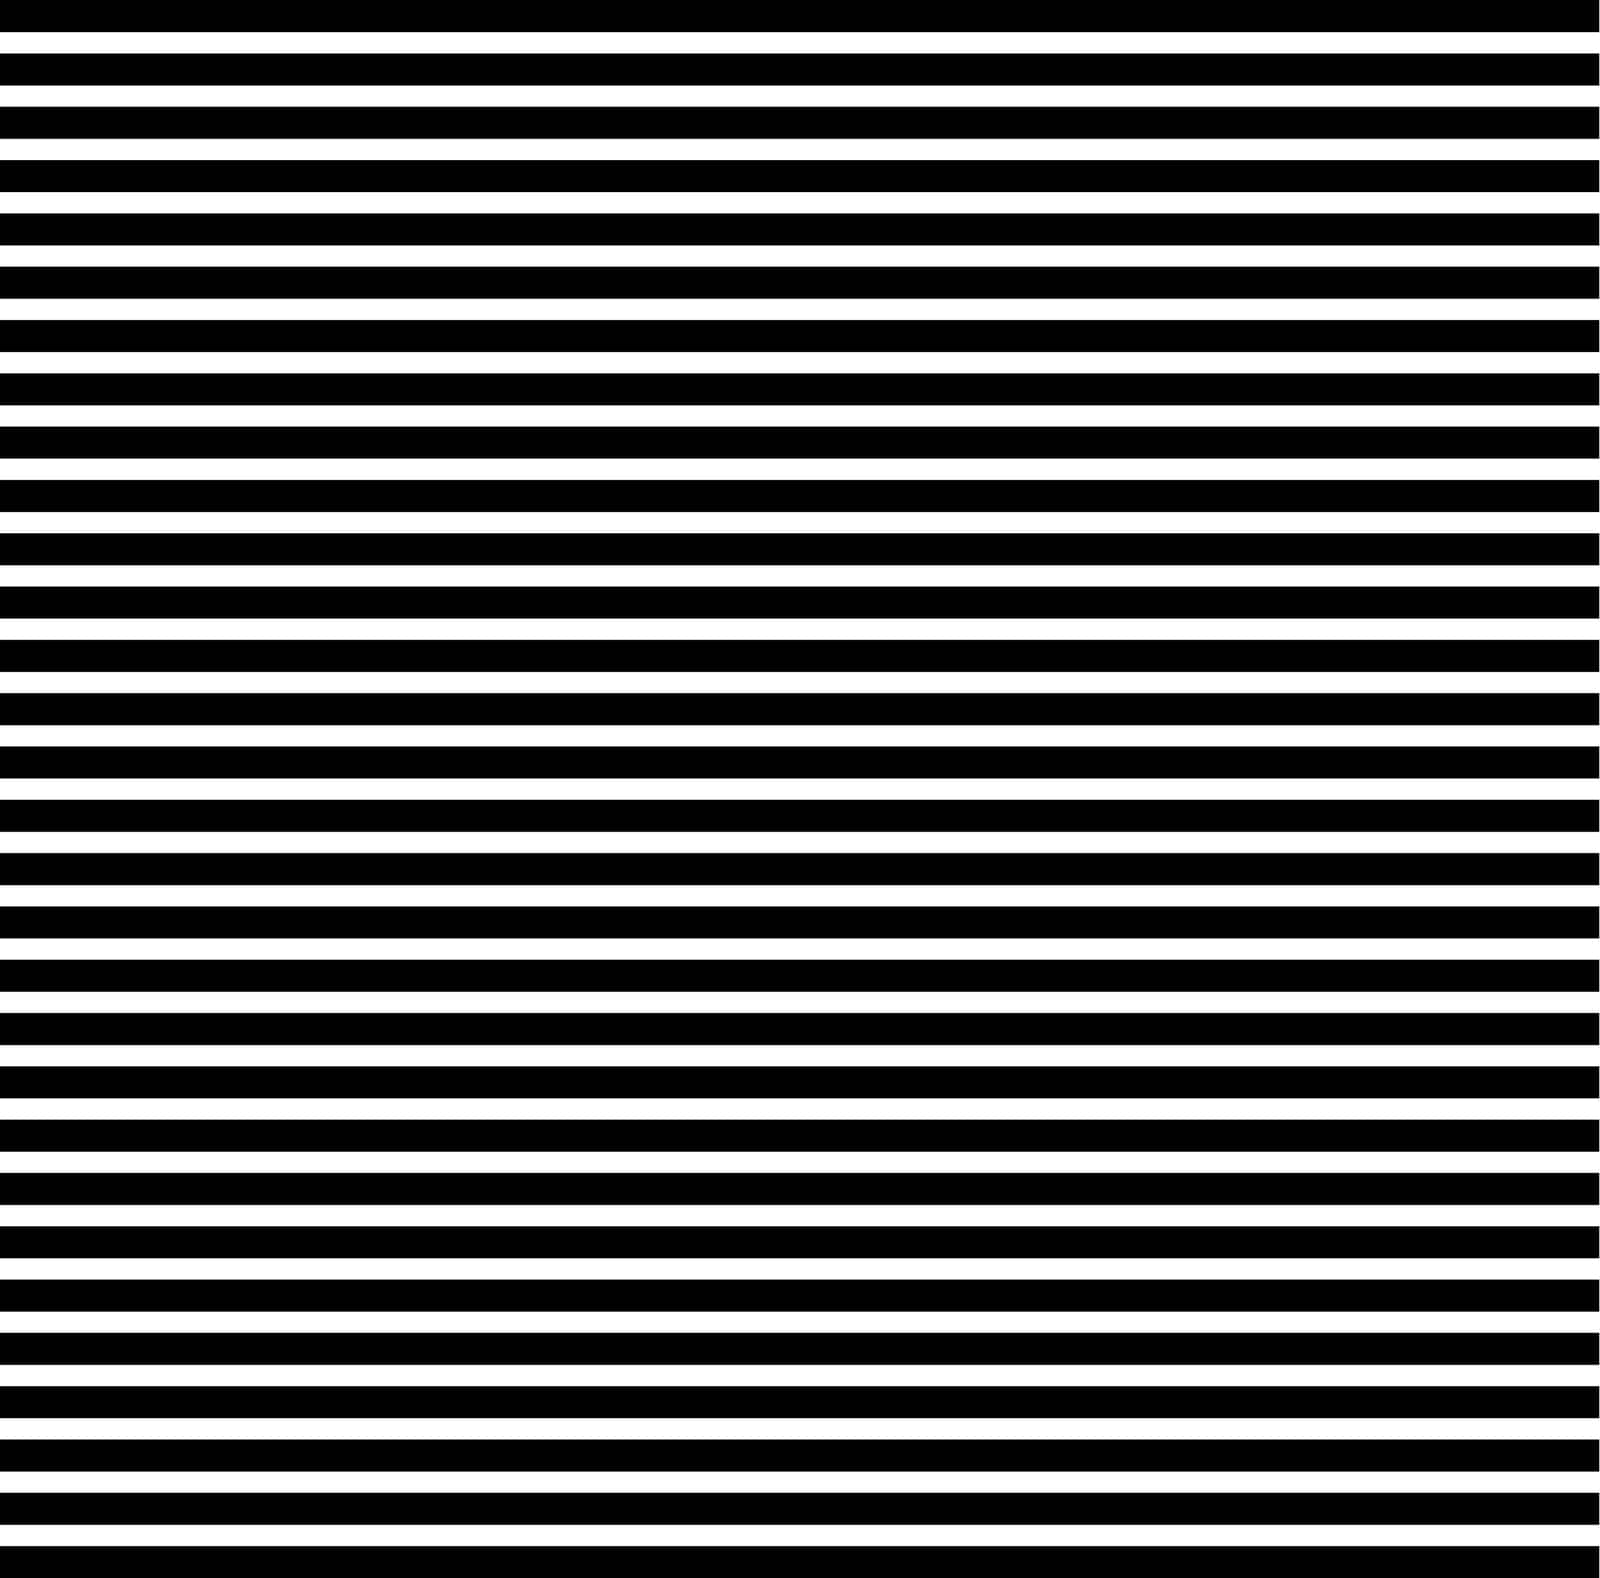 Backgrounds horizontal lines stripes different, thickness intensity, horizontal stripe design